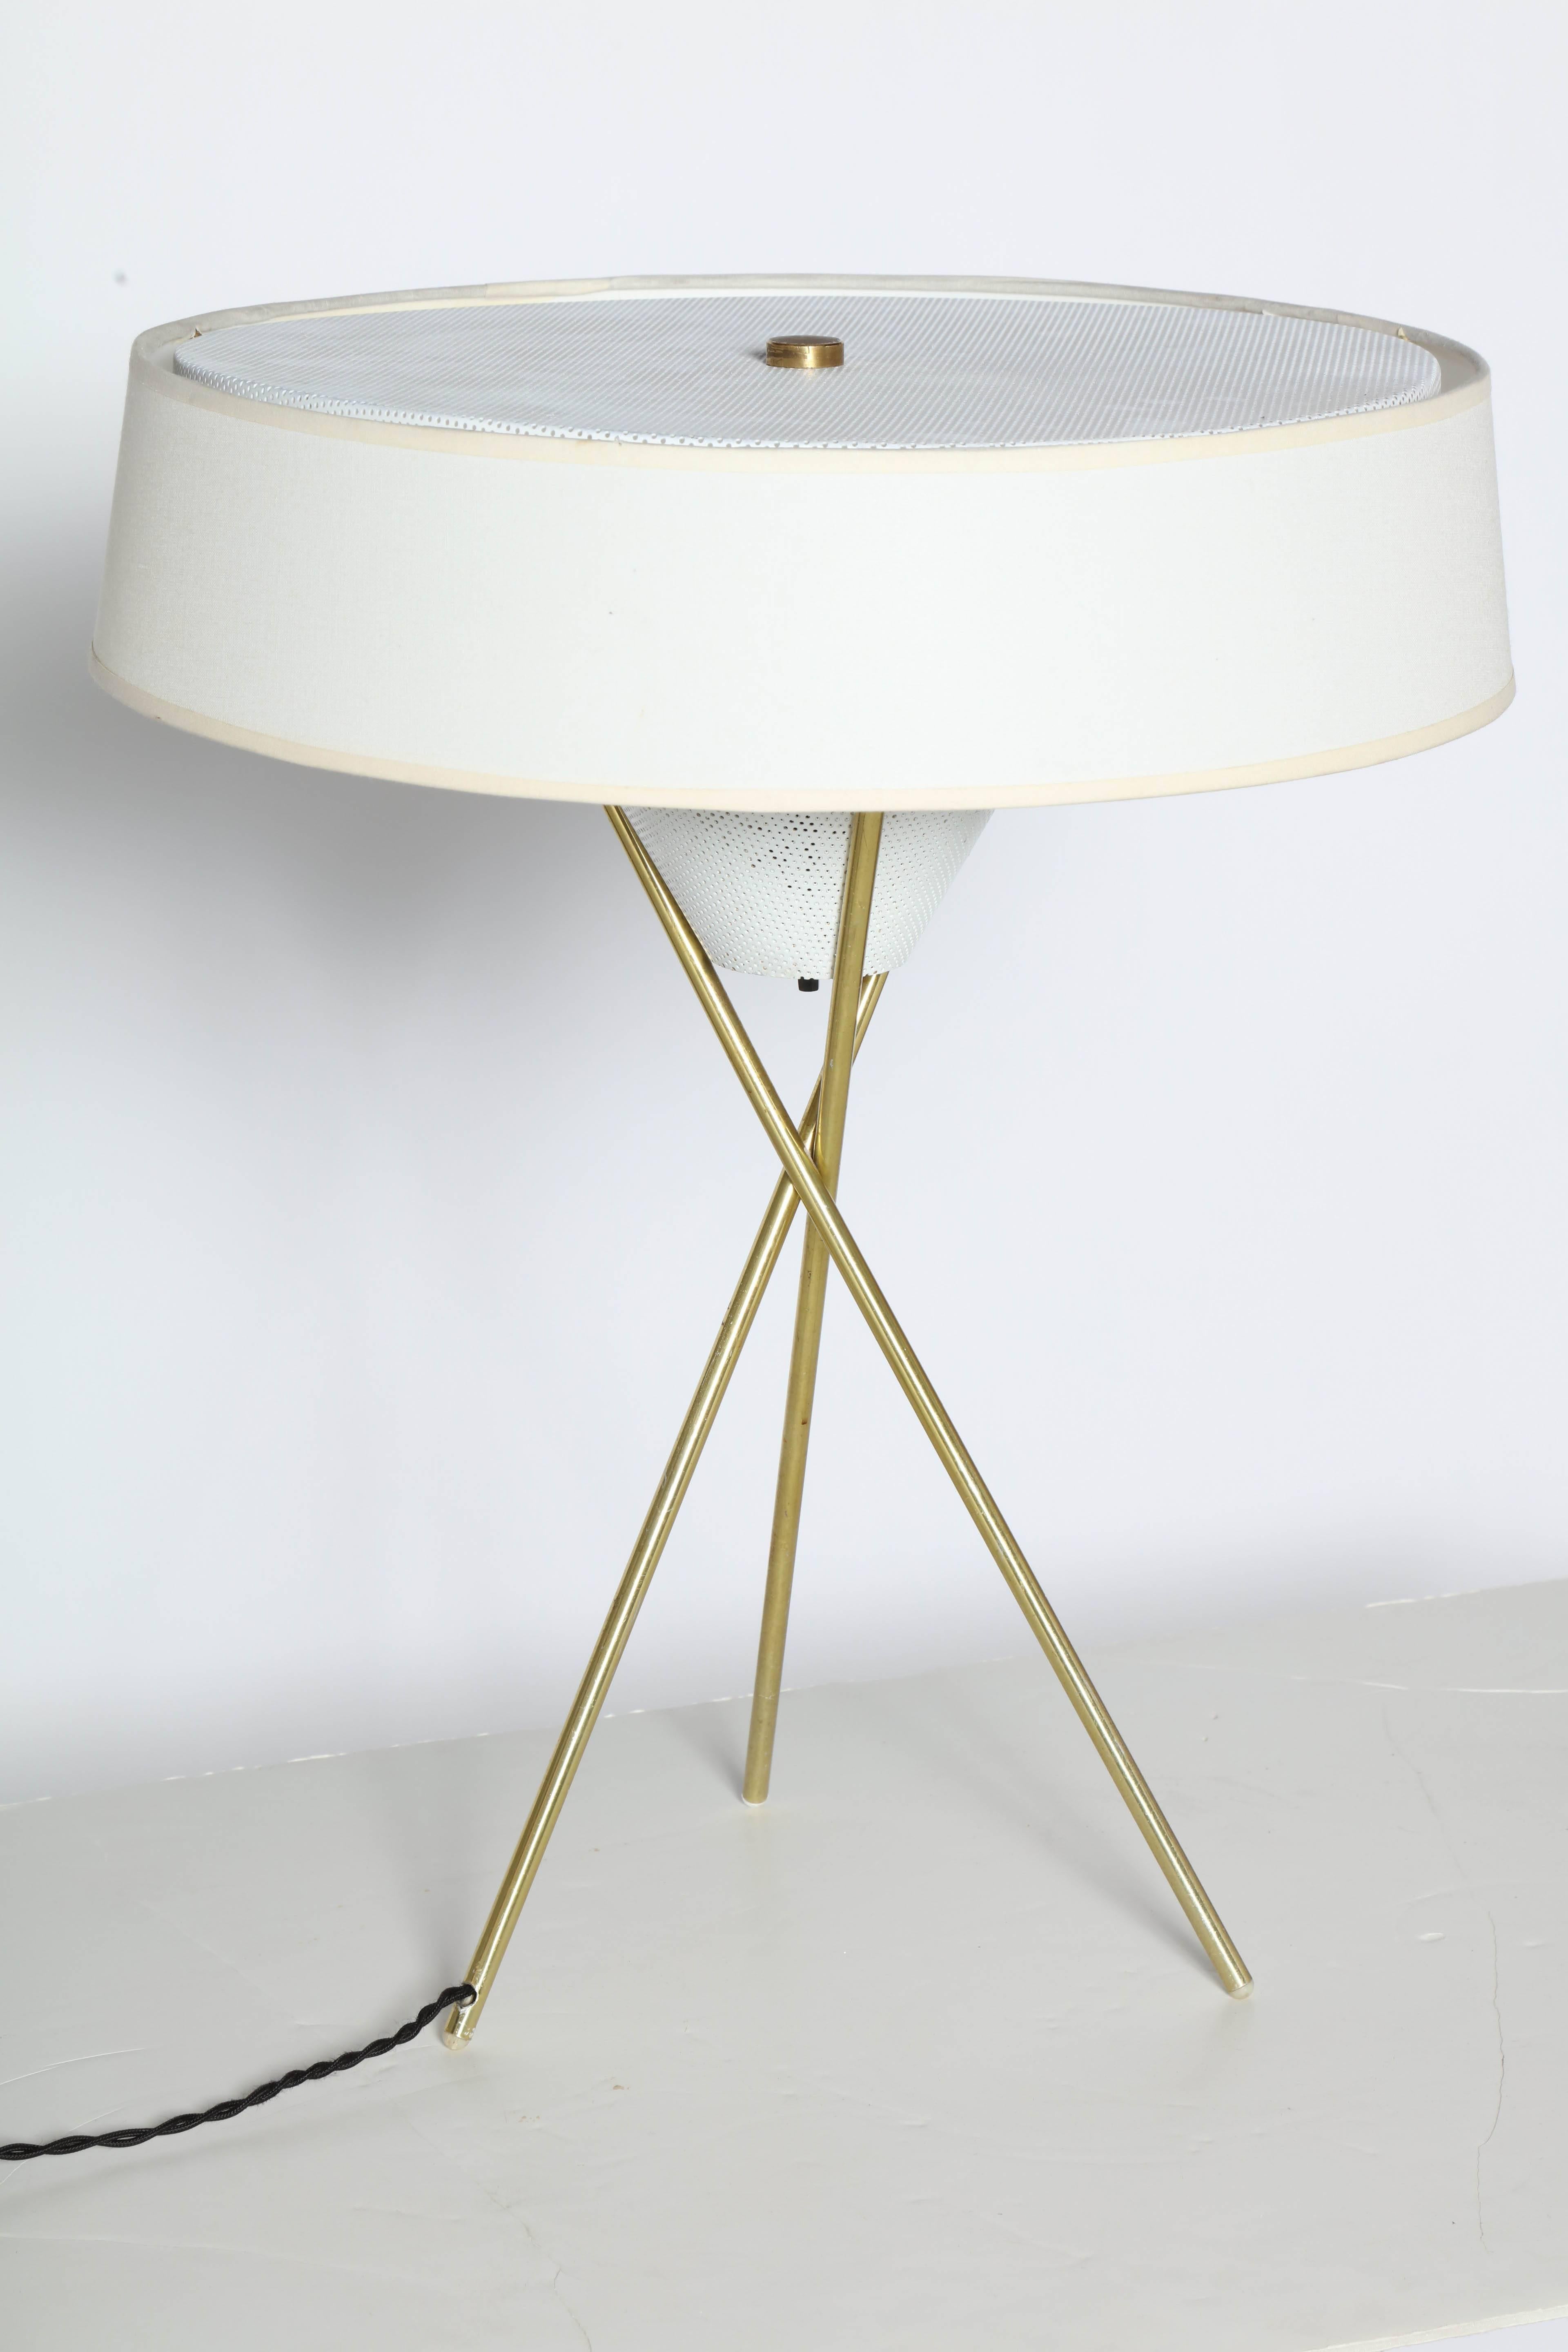 Mid-20th Century Gerald Thurston for Lightolier Brass Tripod Table Lamp with White Linen Shade